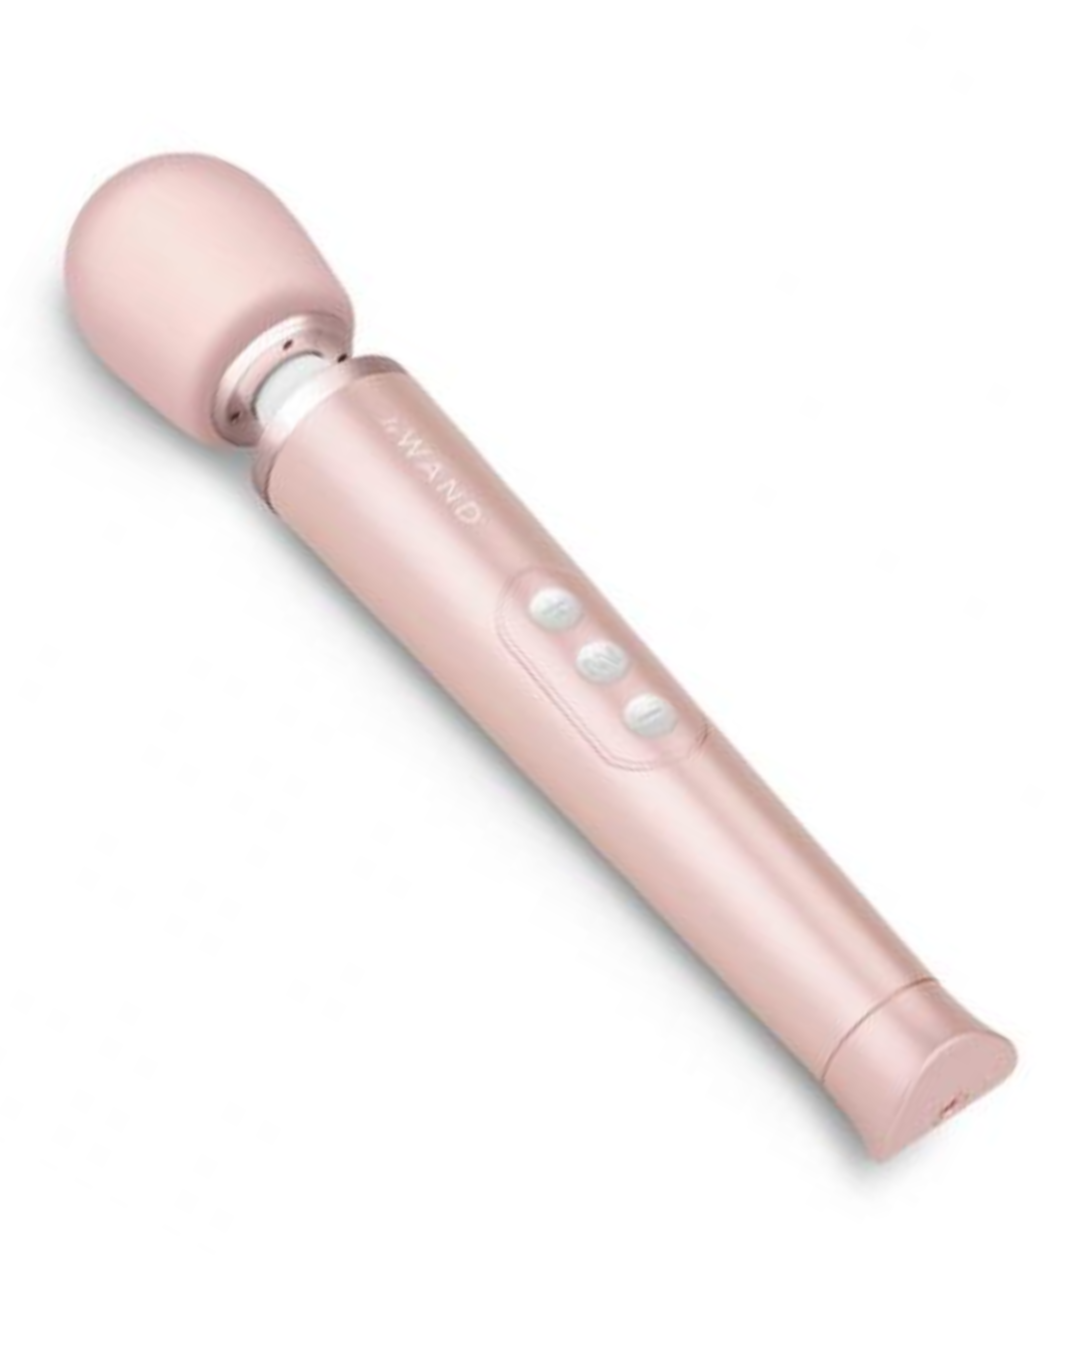 Le Wand Petite Rechargeable Massager - Rose Gold against a white background showing the buttons 